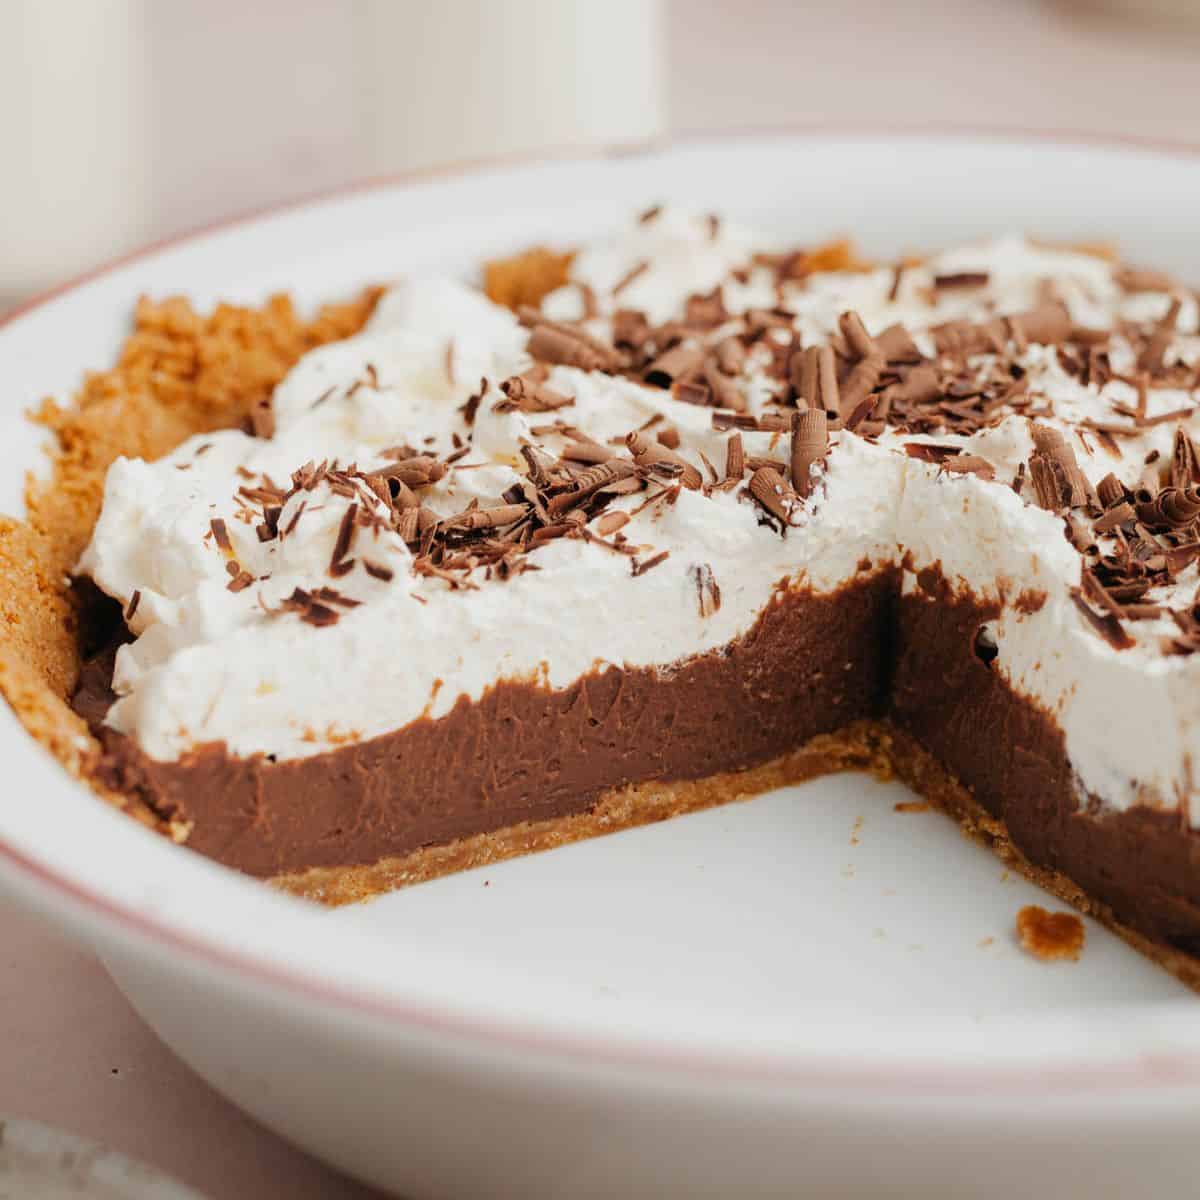 A chocolate pudding pie covered in whipped cream in a white pie dish.